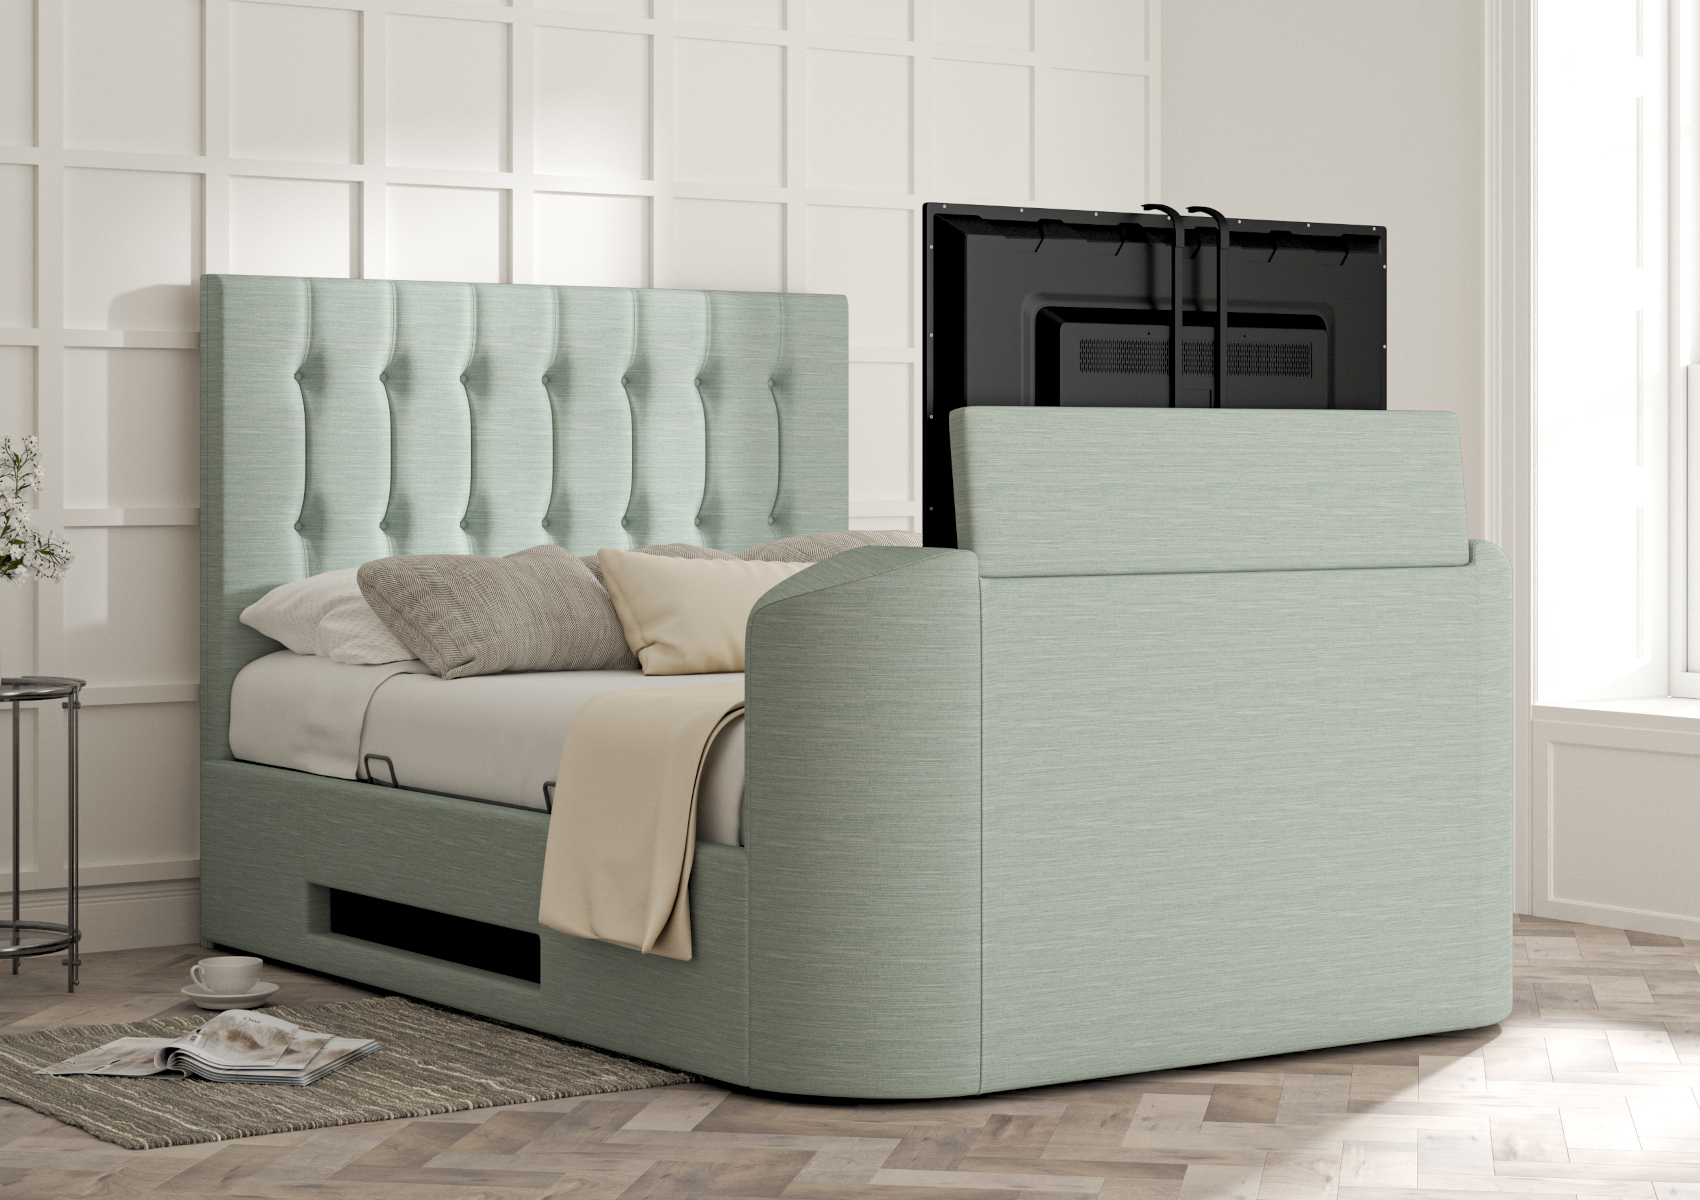 View Dorchester Linea SeaBlue Upholstered King Size Multifunctional Ottoman Smart TV Bed Time4Sleep information